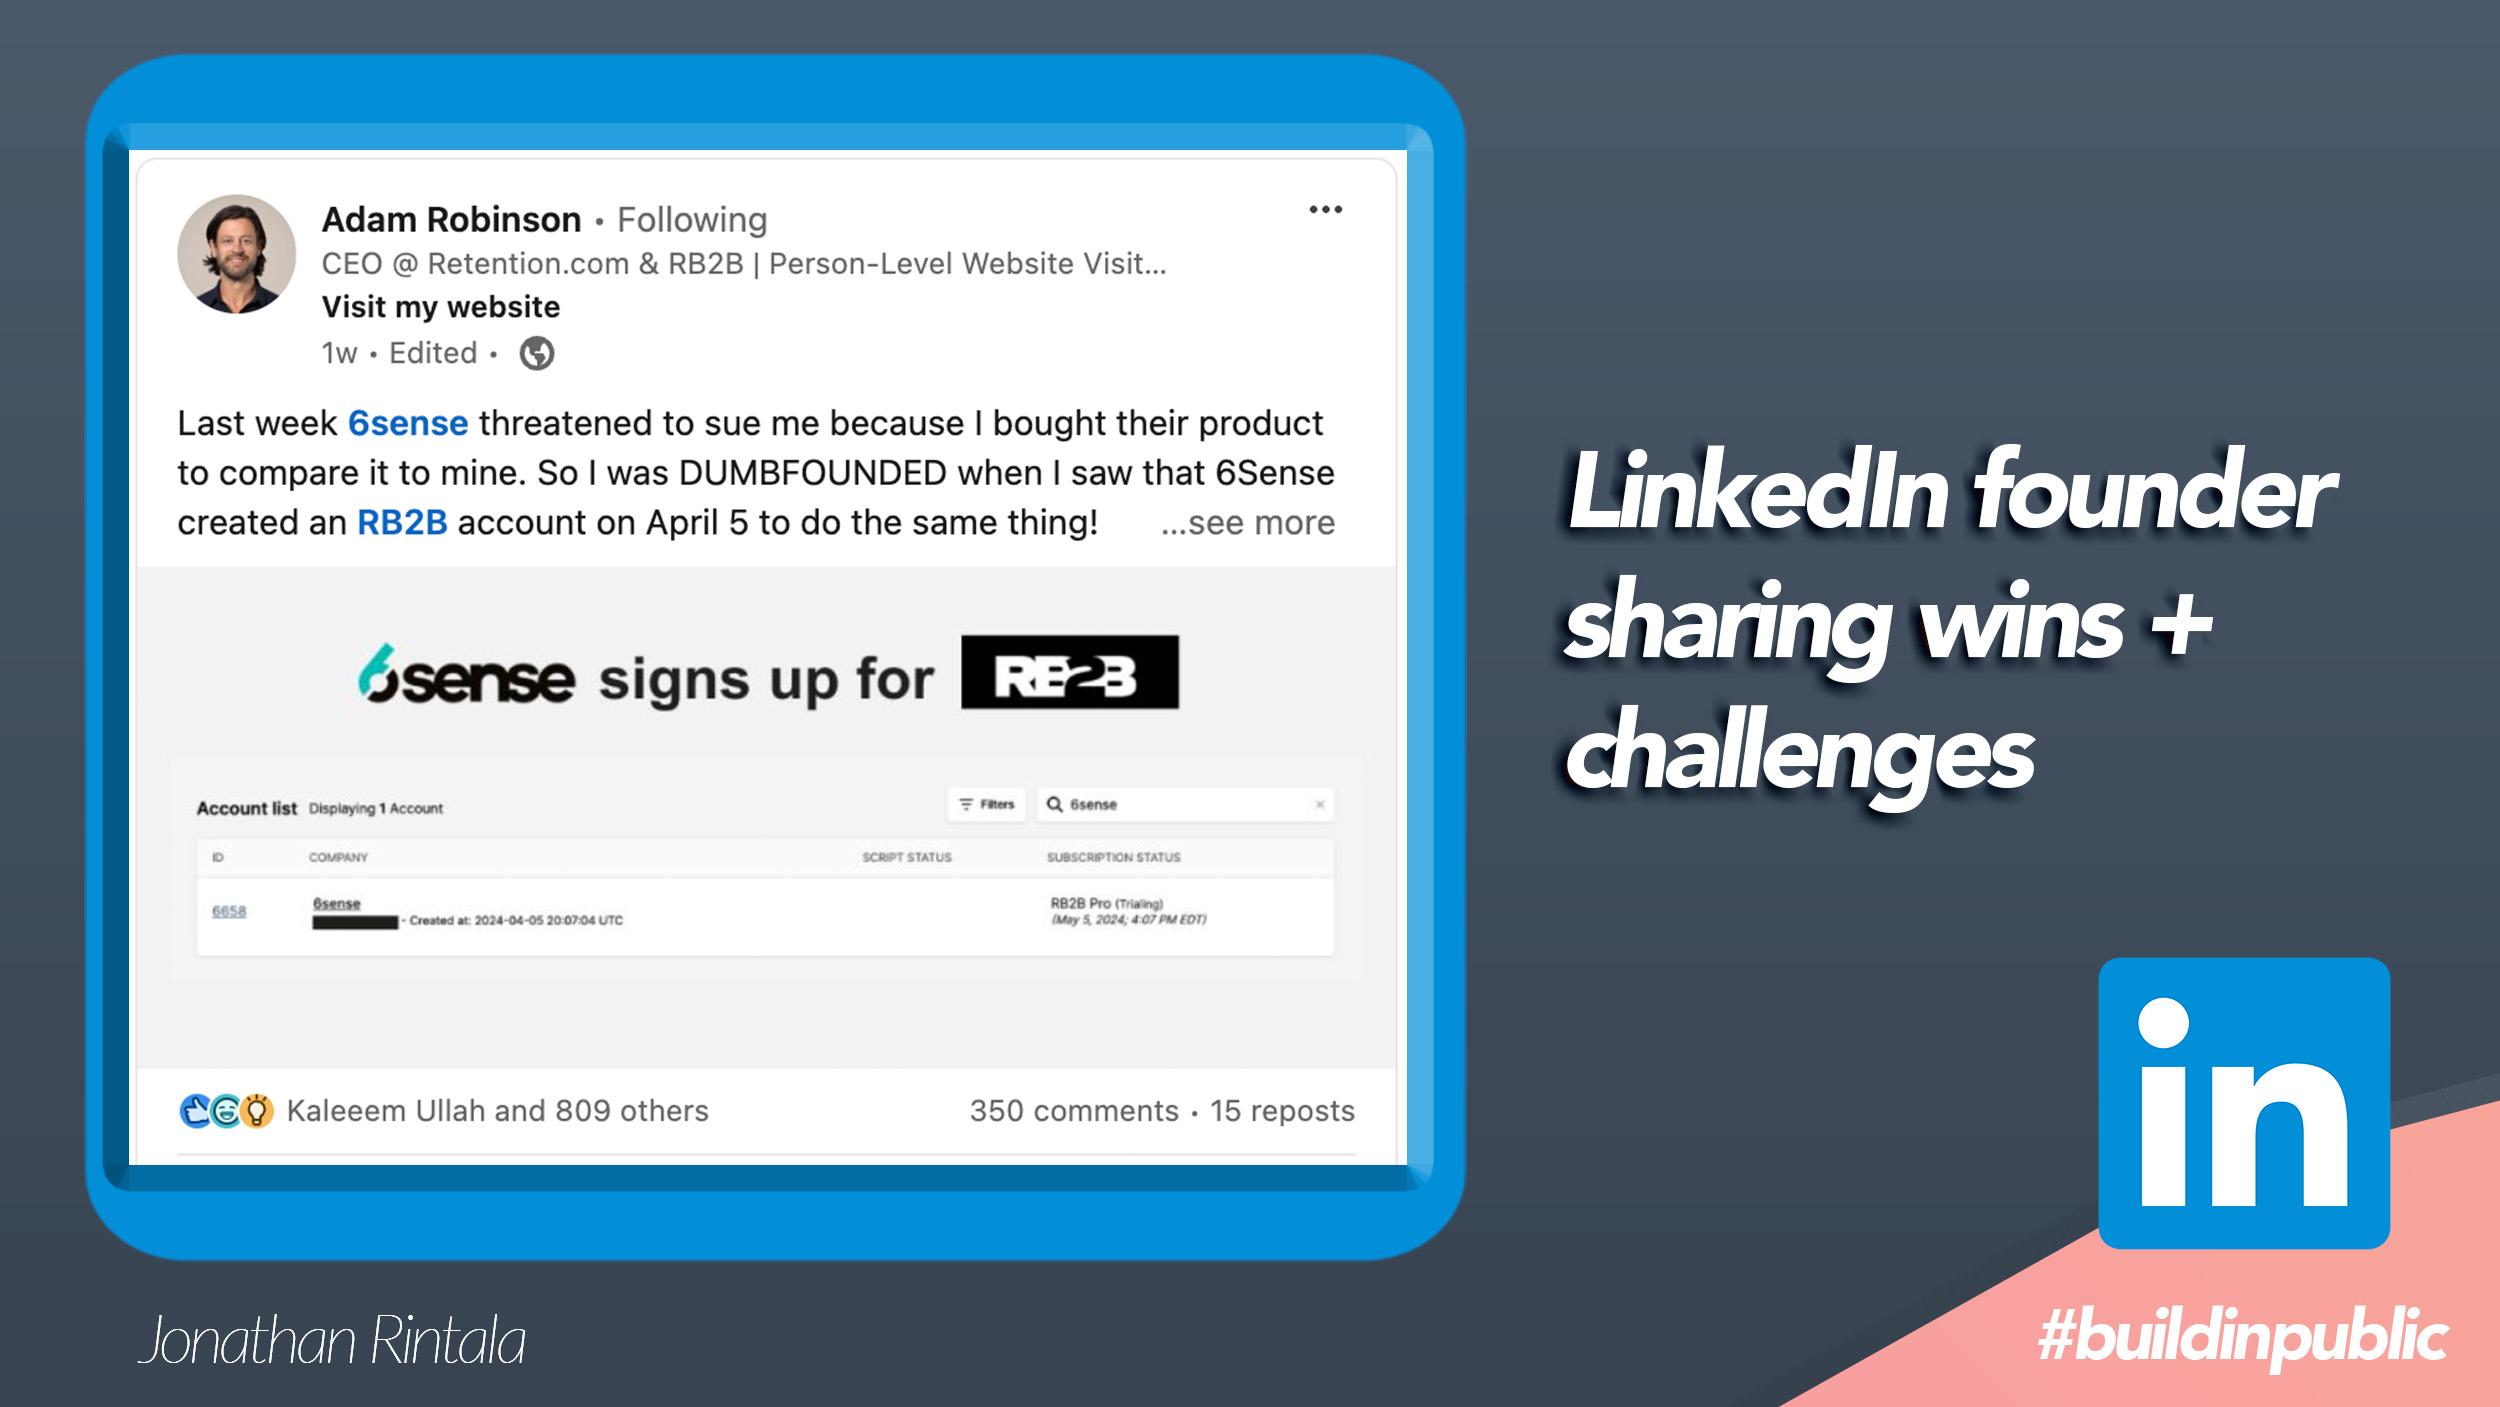 Example: LinkedIn founder sharing wins and challenges - The Art of Storytelling